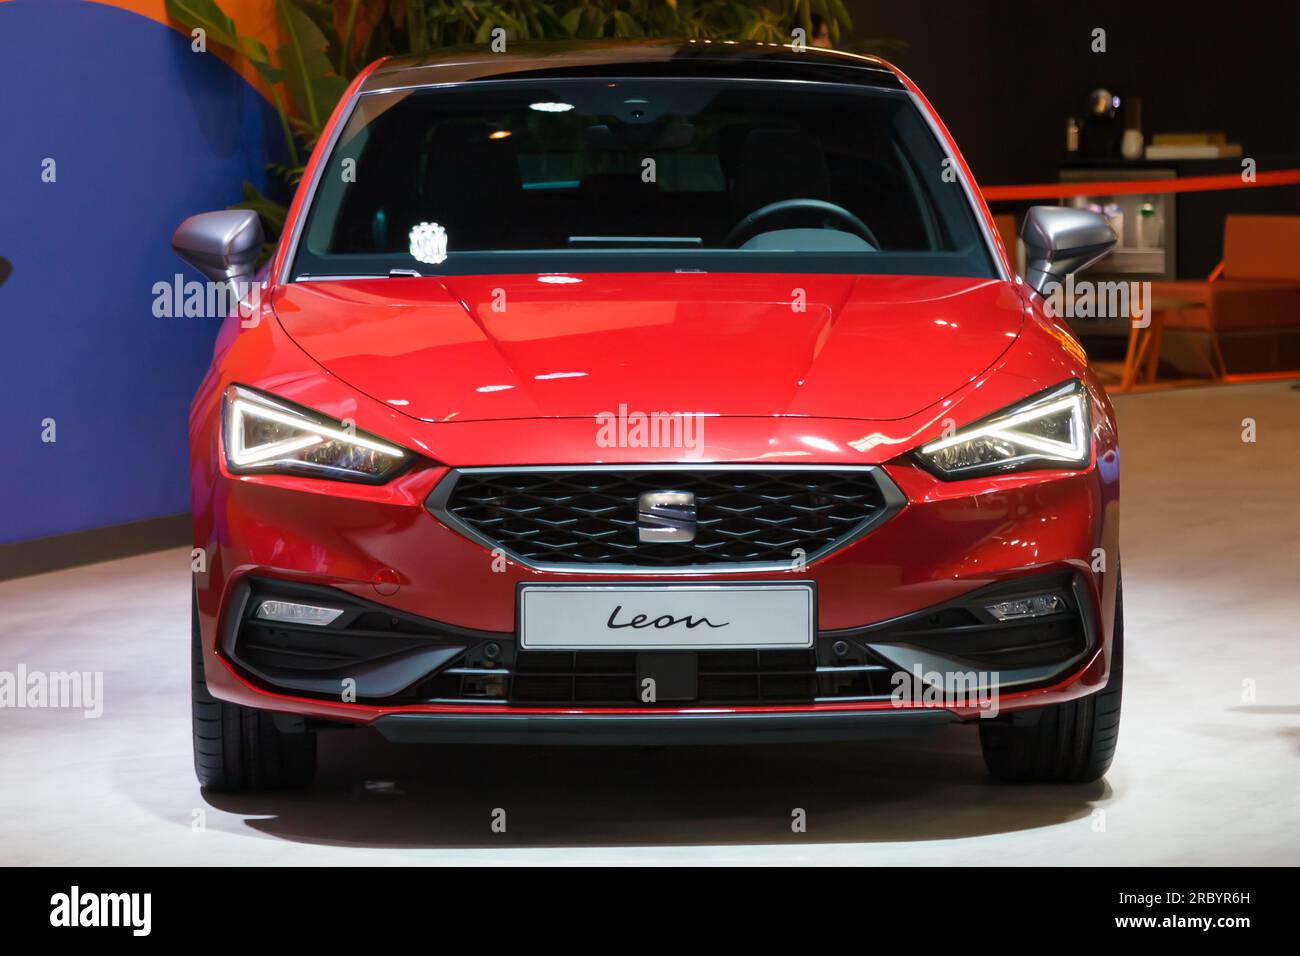 Barcelona, Spain - May 14, 2023: Seat Leon on display at Automobile Barcelona 2023 in Barcelona, Spain. Stock Photo